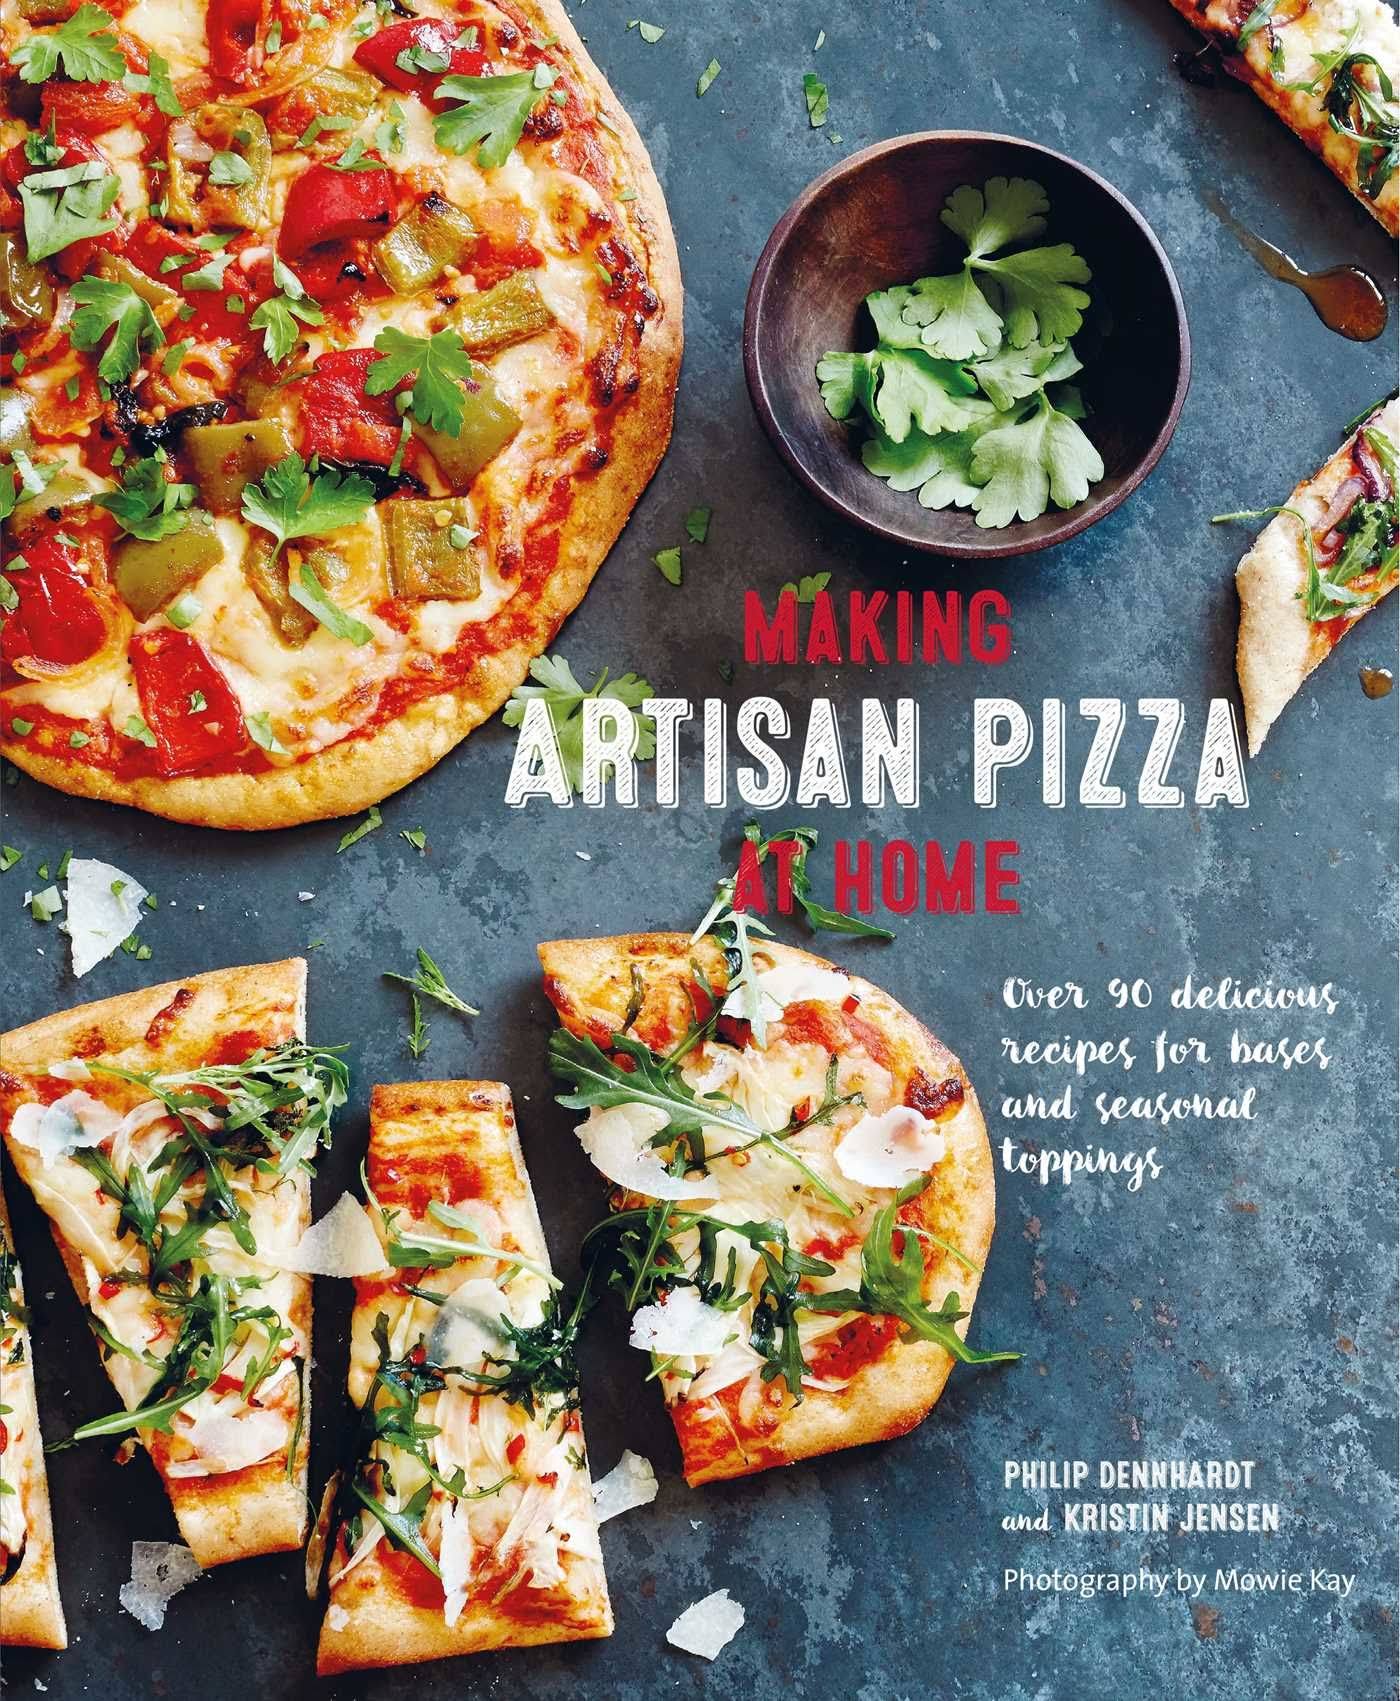 Making Artisan Pizza at Home: Over 90 Delicious Recipes for Bases and Seasonal Toppings [Book]